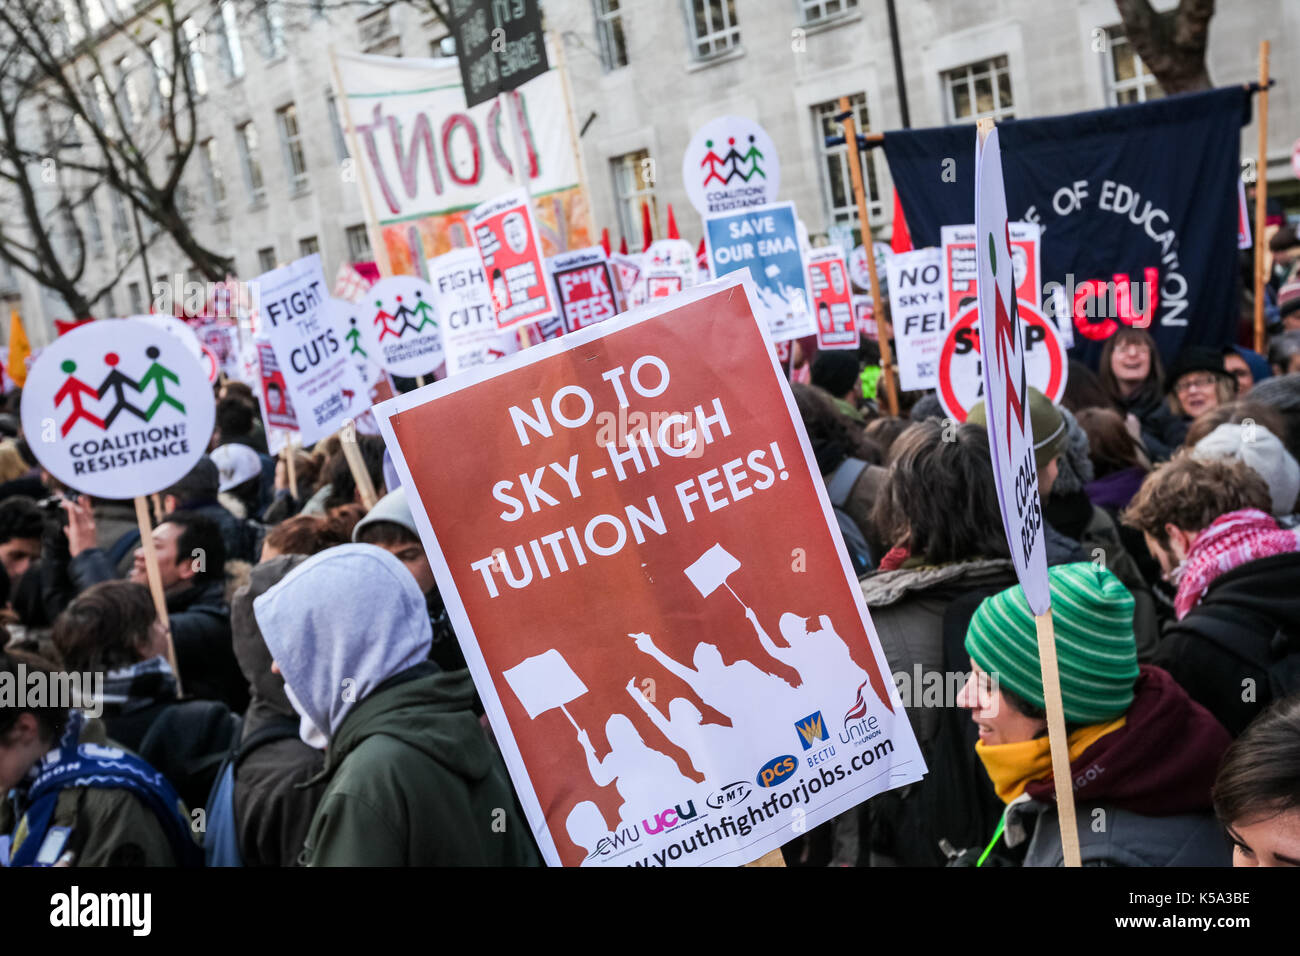 Mass student protests and civil unrest in London against increases in university tuition fees. Stock Photo